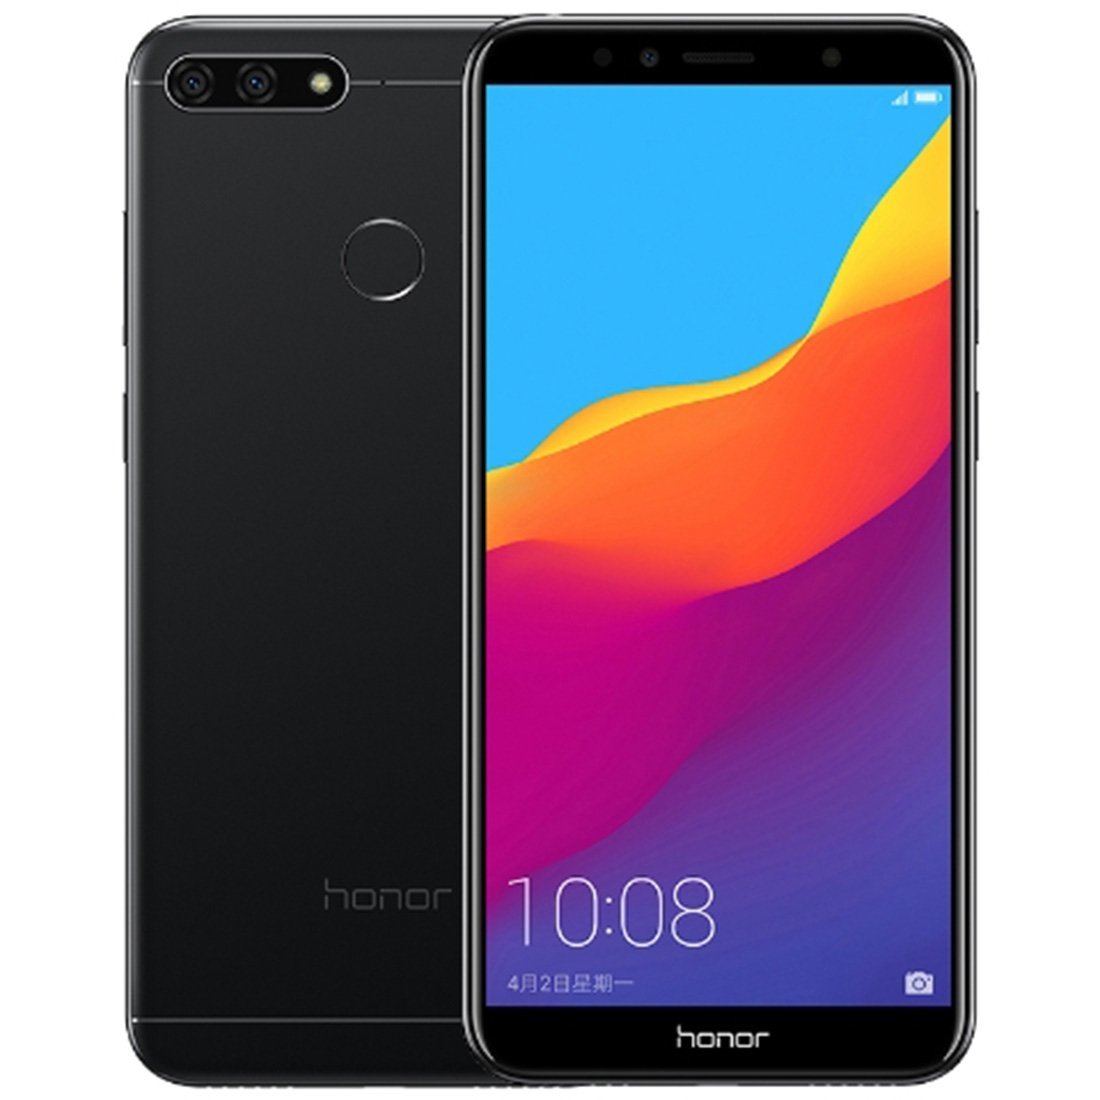 Huawei Honor 7A Specifications